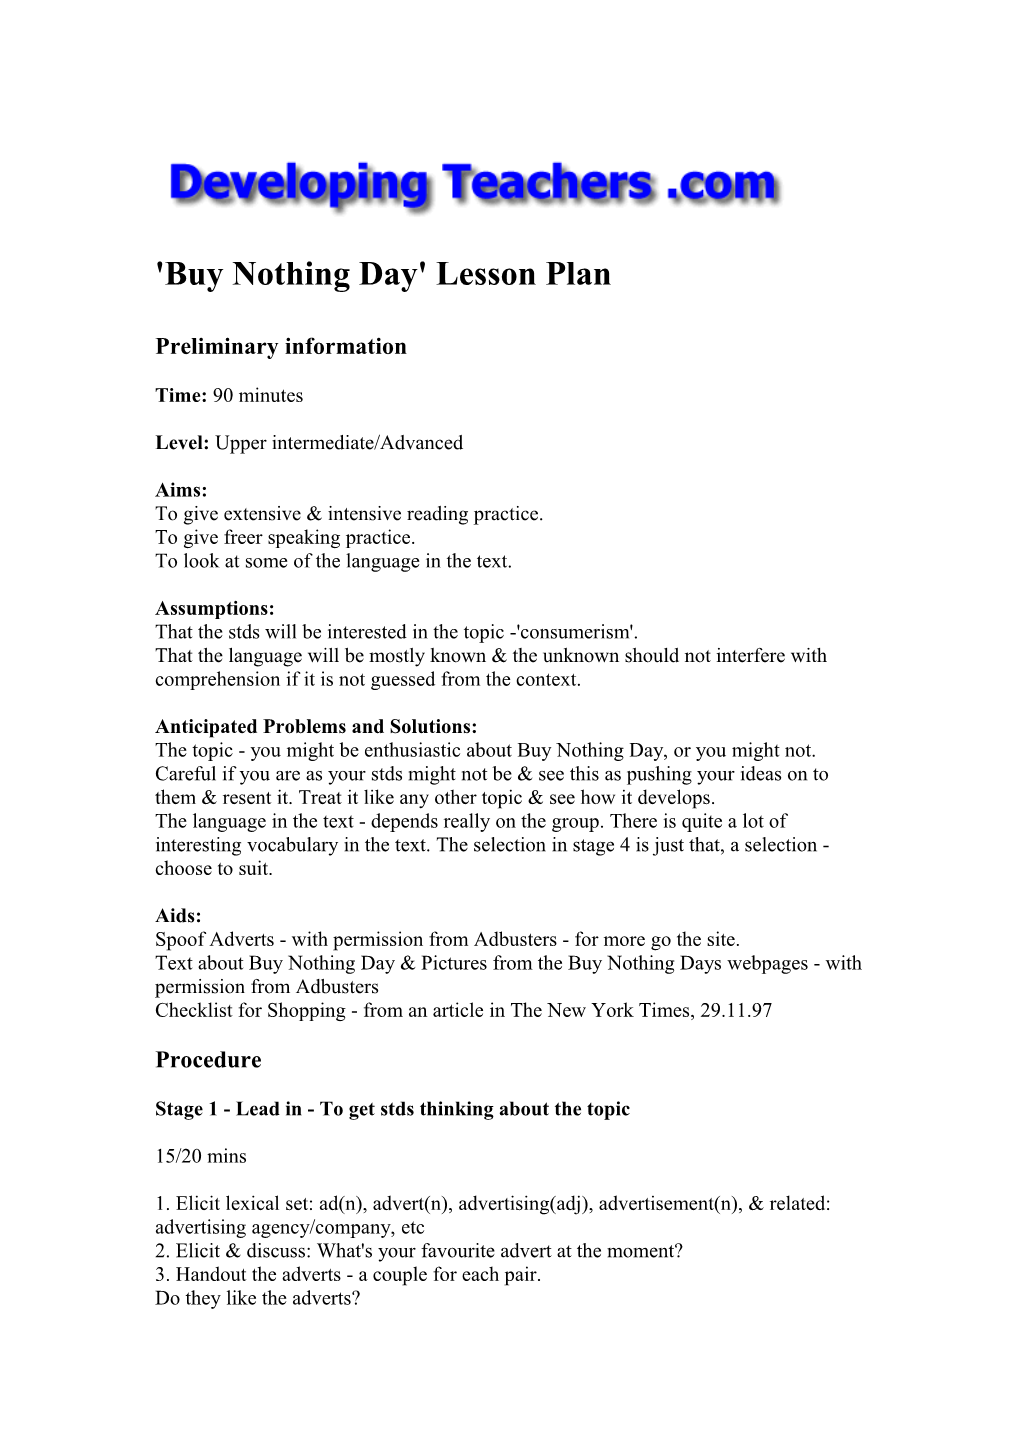 'Buy Nothing Day' Lesson Plan